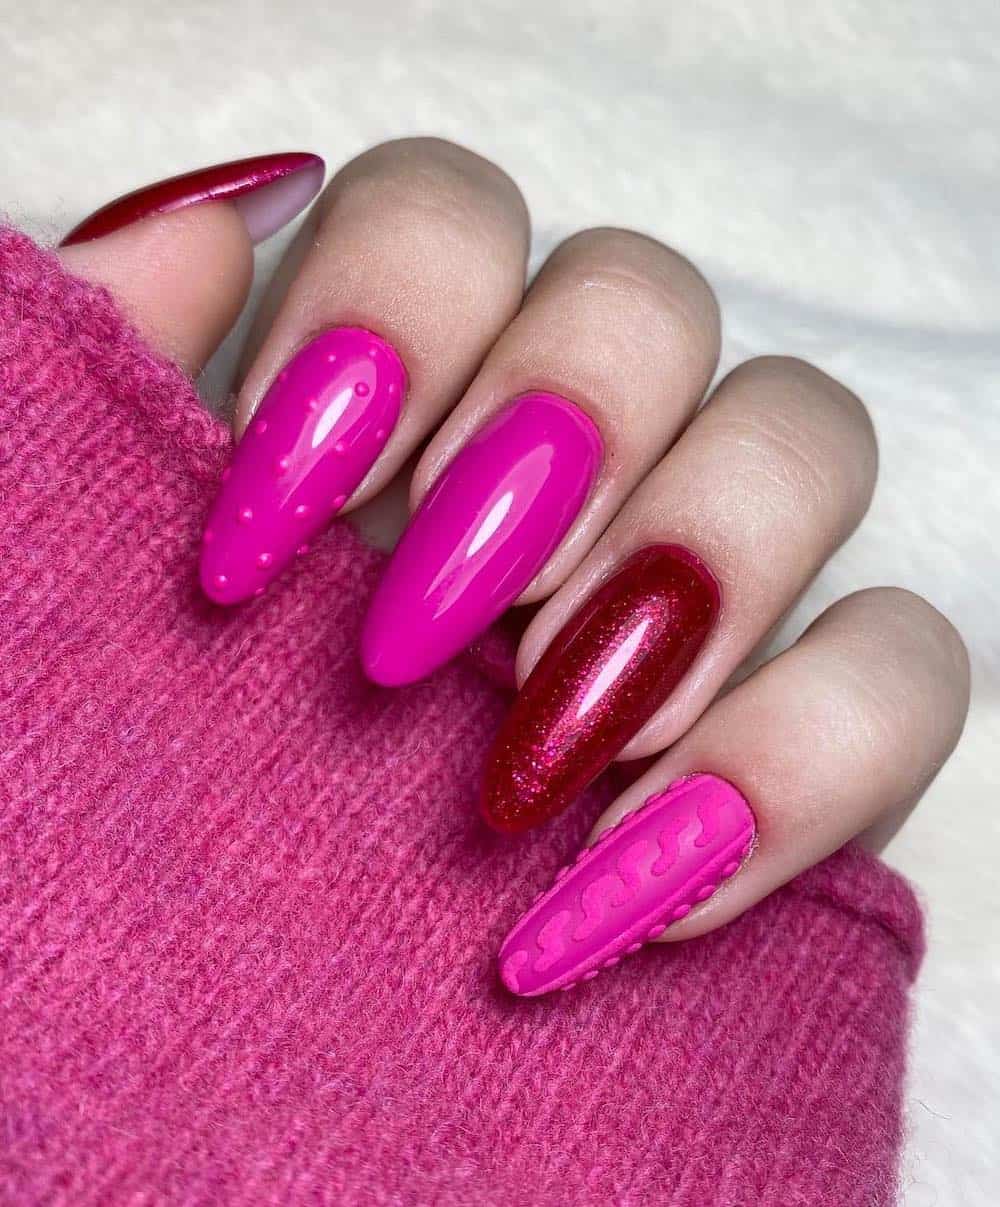 A hand with long almond nails painted a bright pink with dot details and sweater nail art, and two sparkly red accent nails